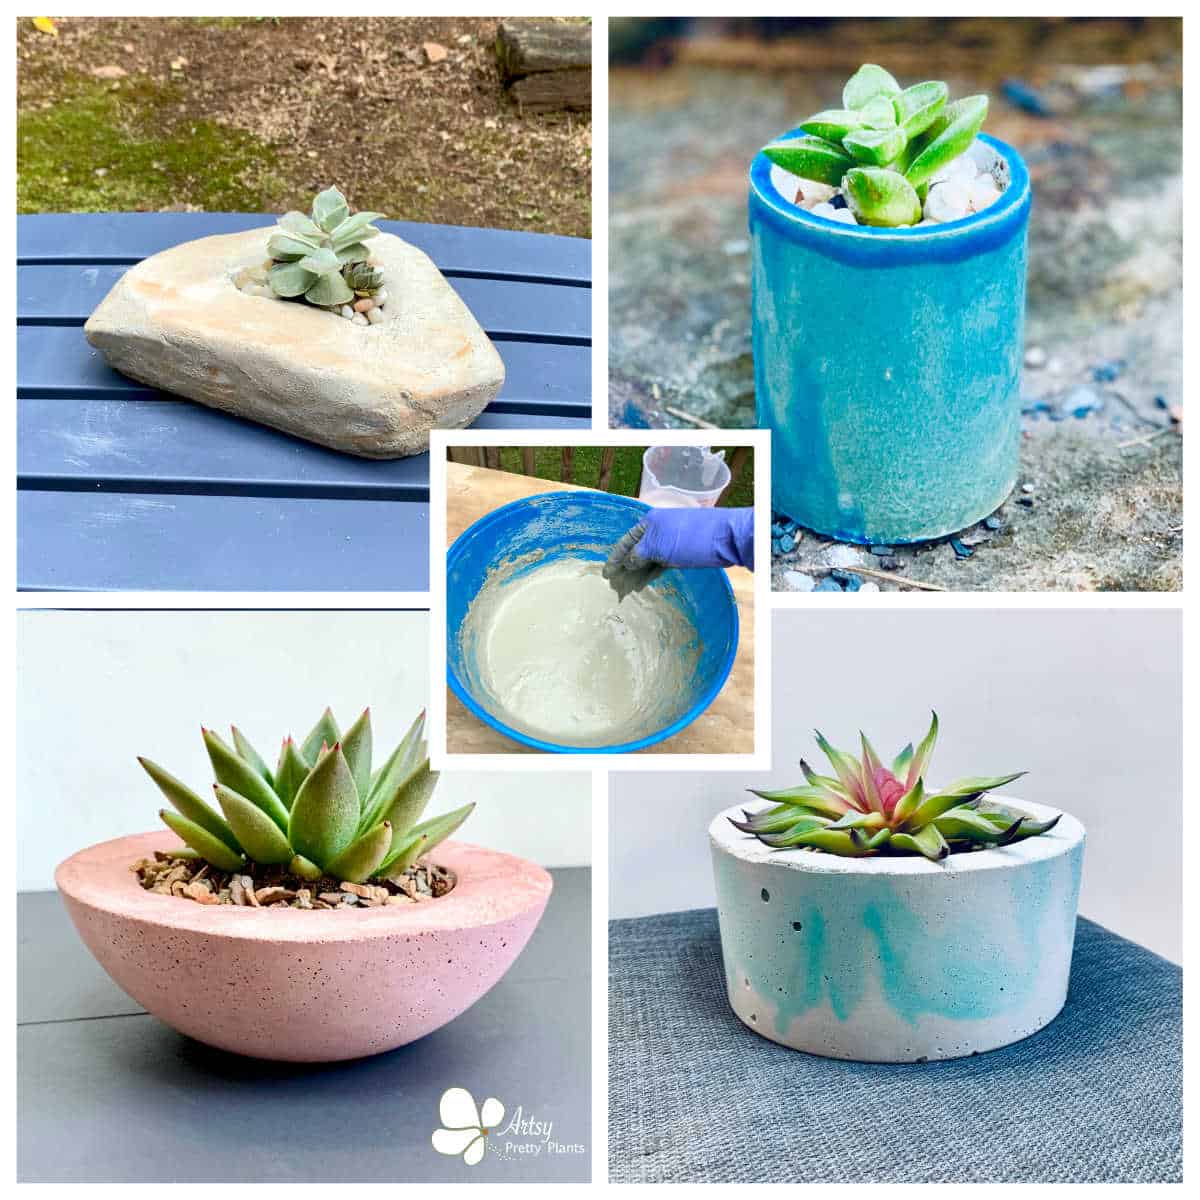 How To Make Concrete Planters -Ultimate Guide!